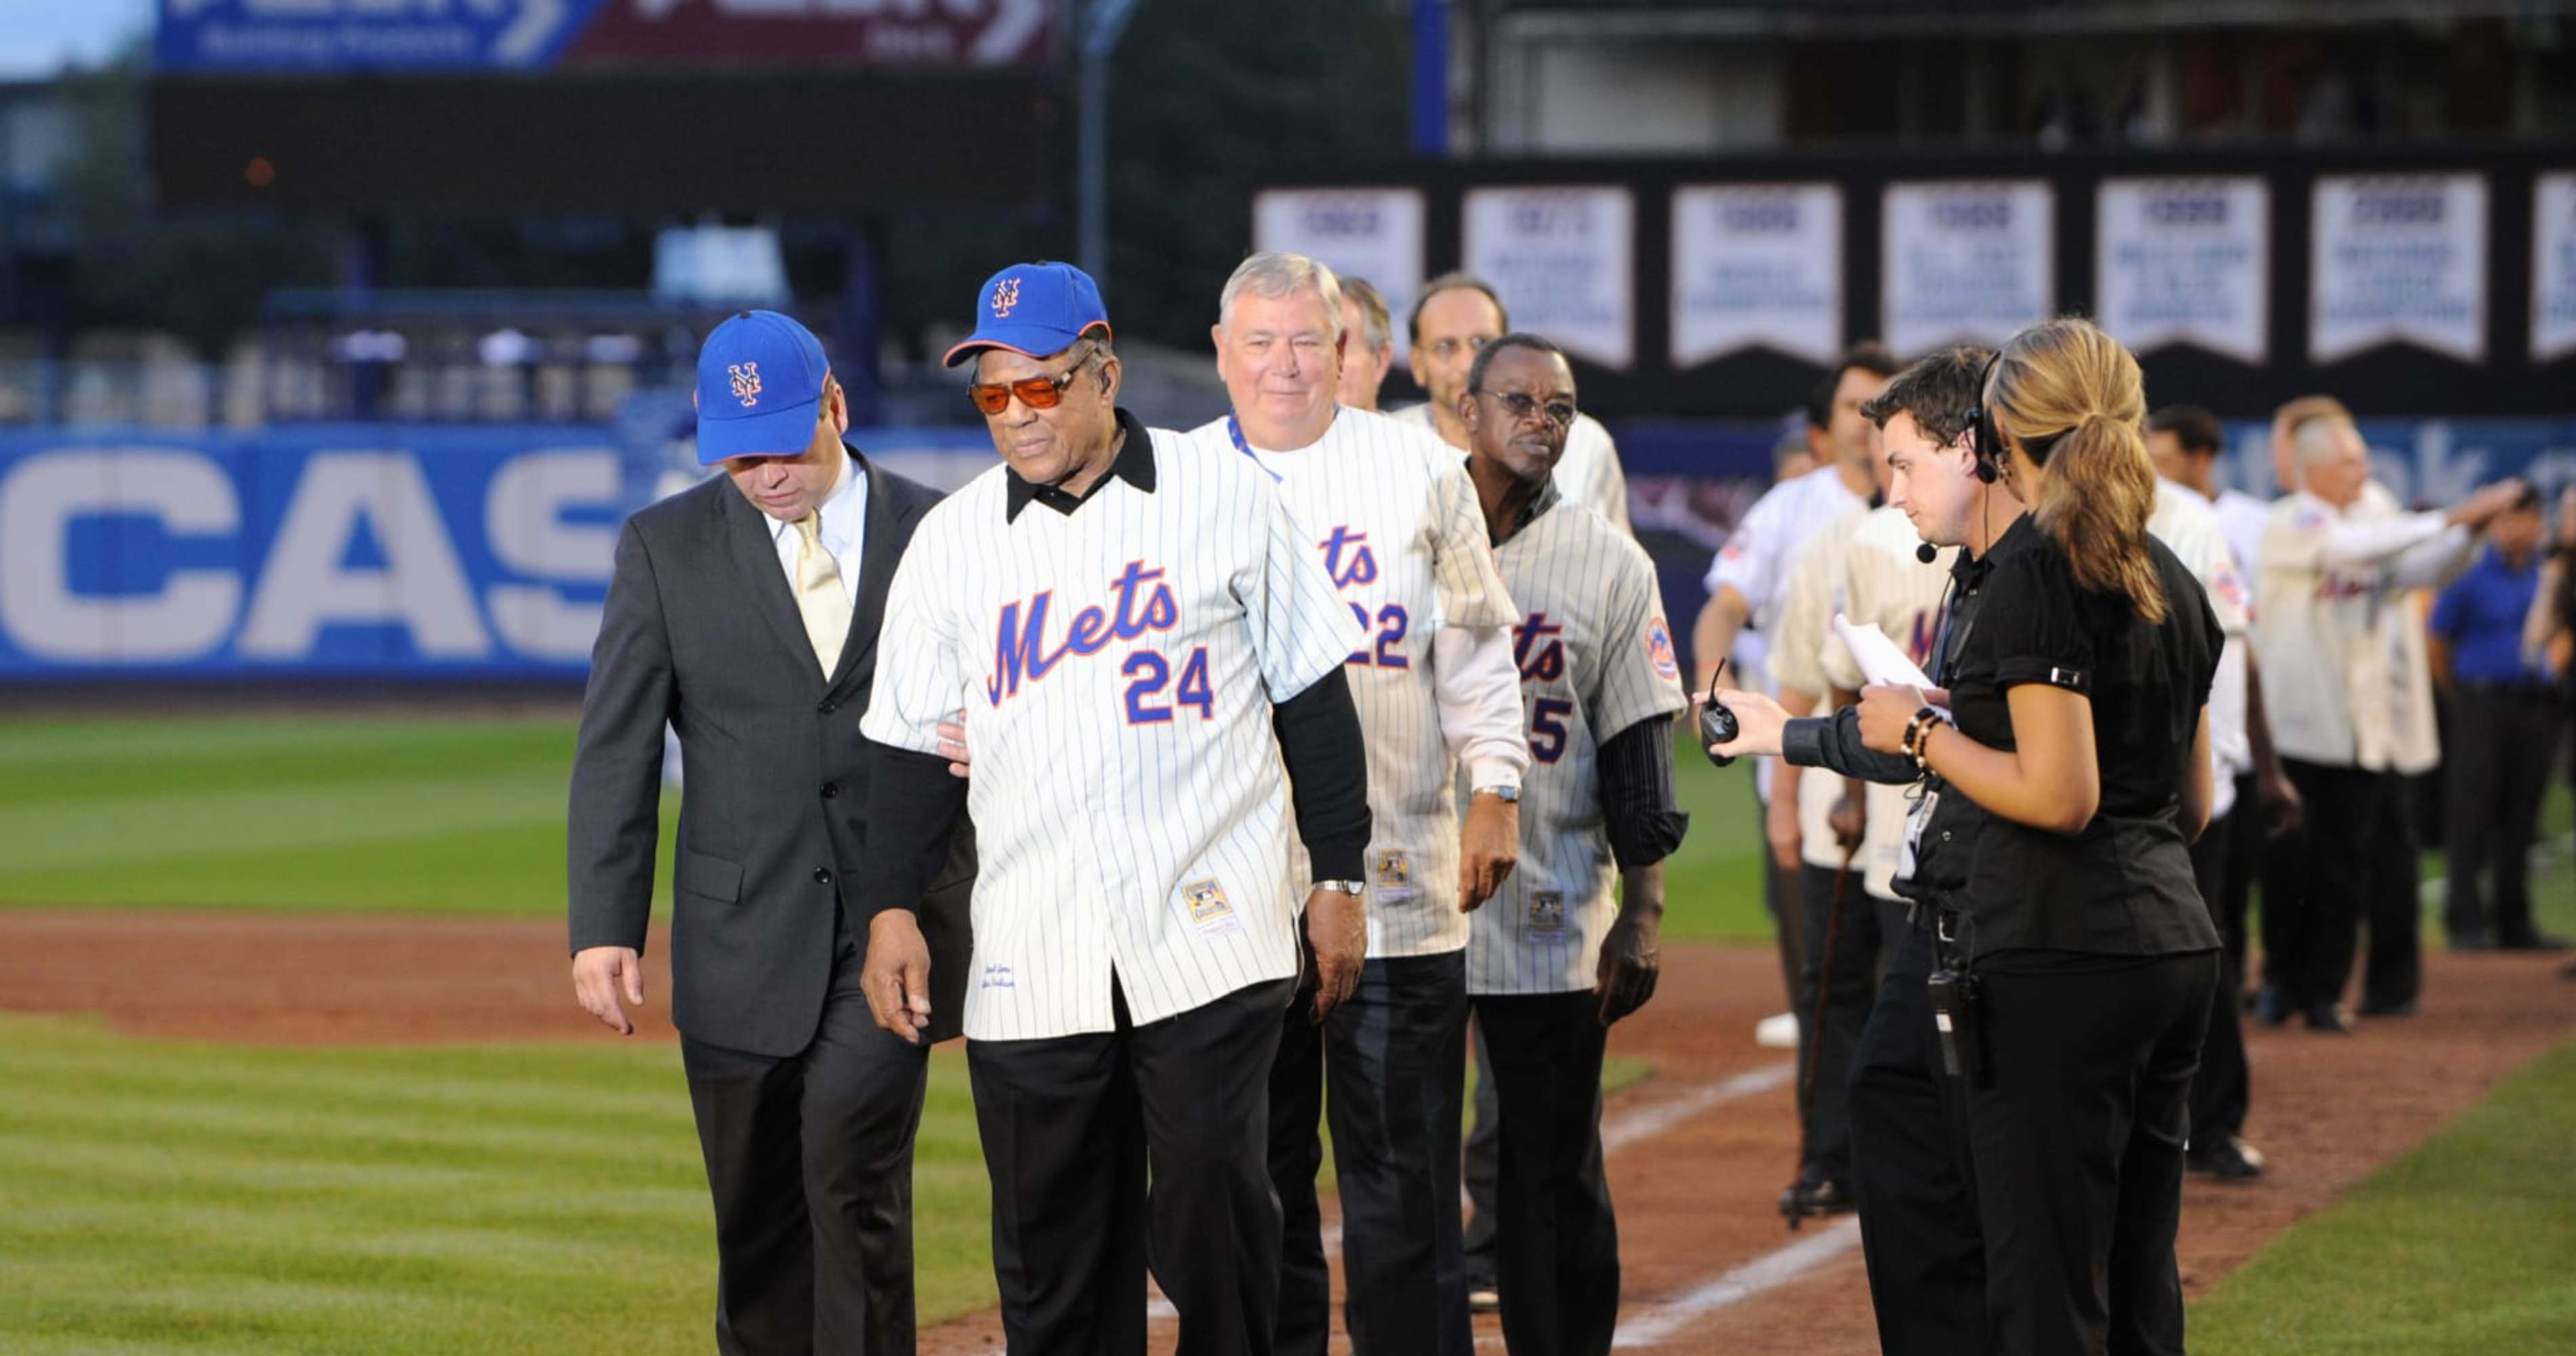 Mets Retire Willie Mays's Number at Old-Timers Day - The New York